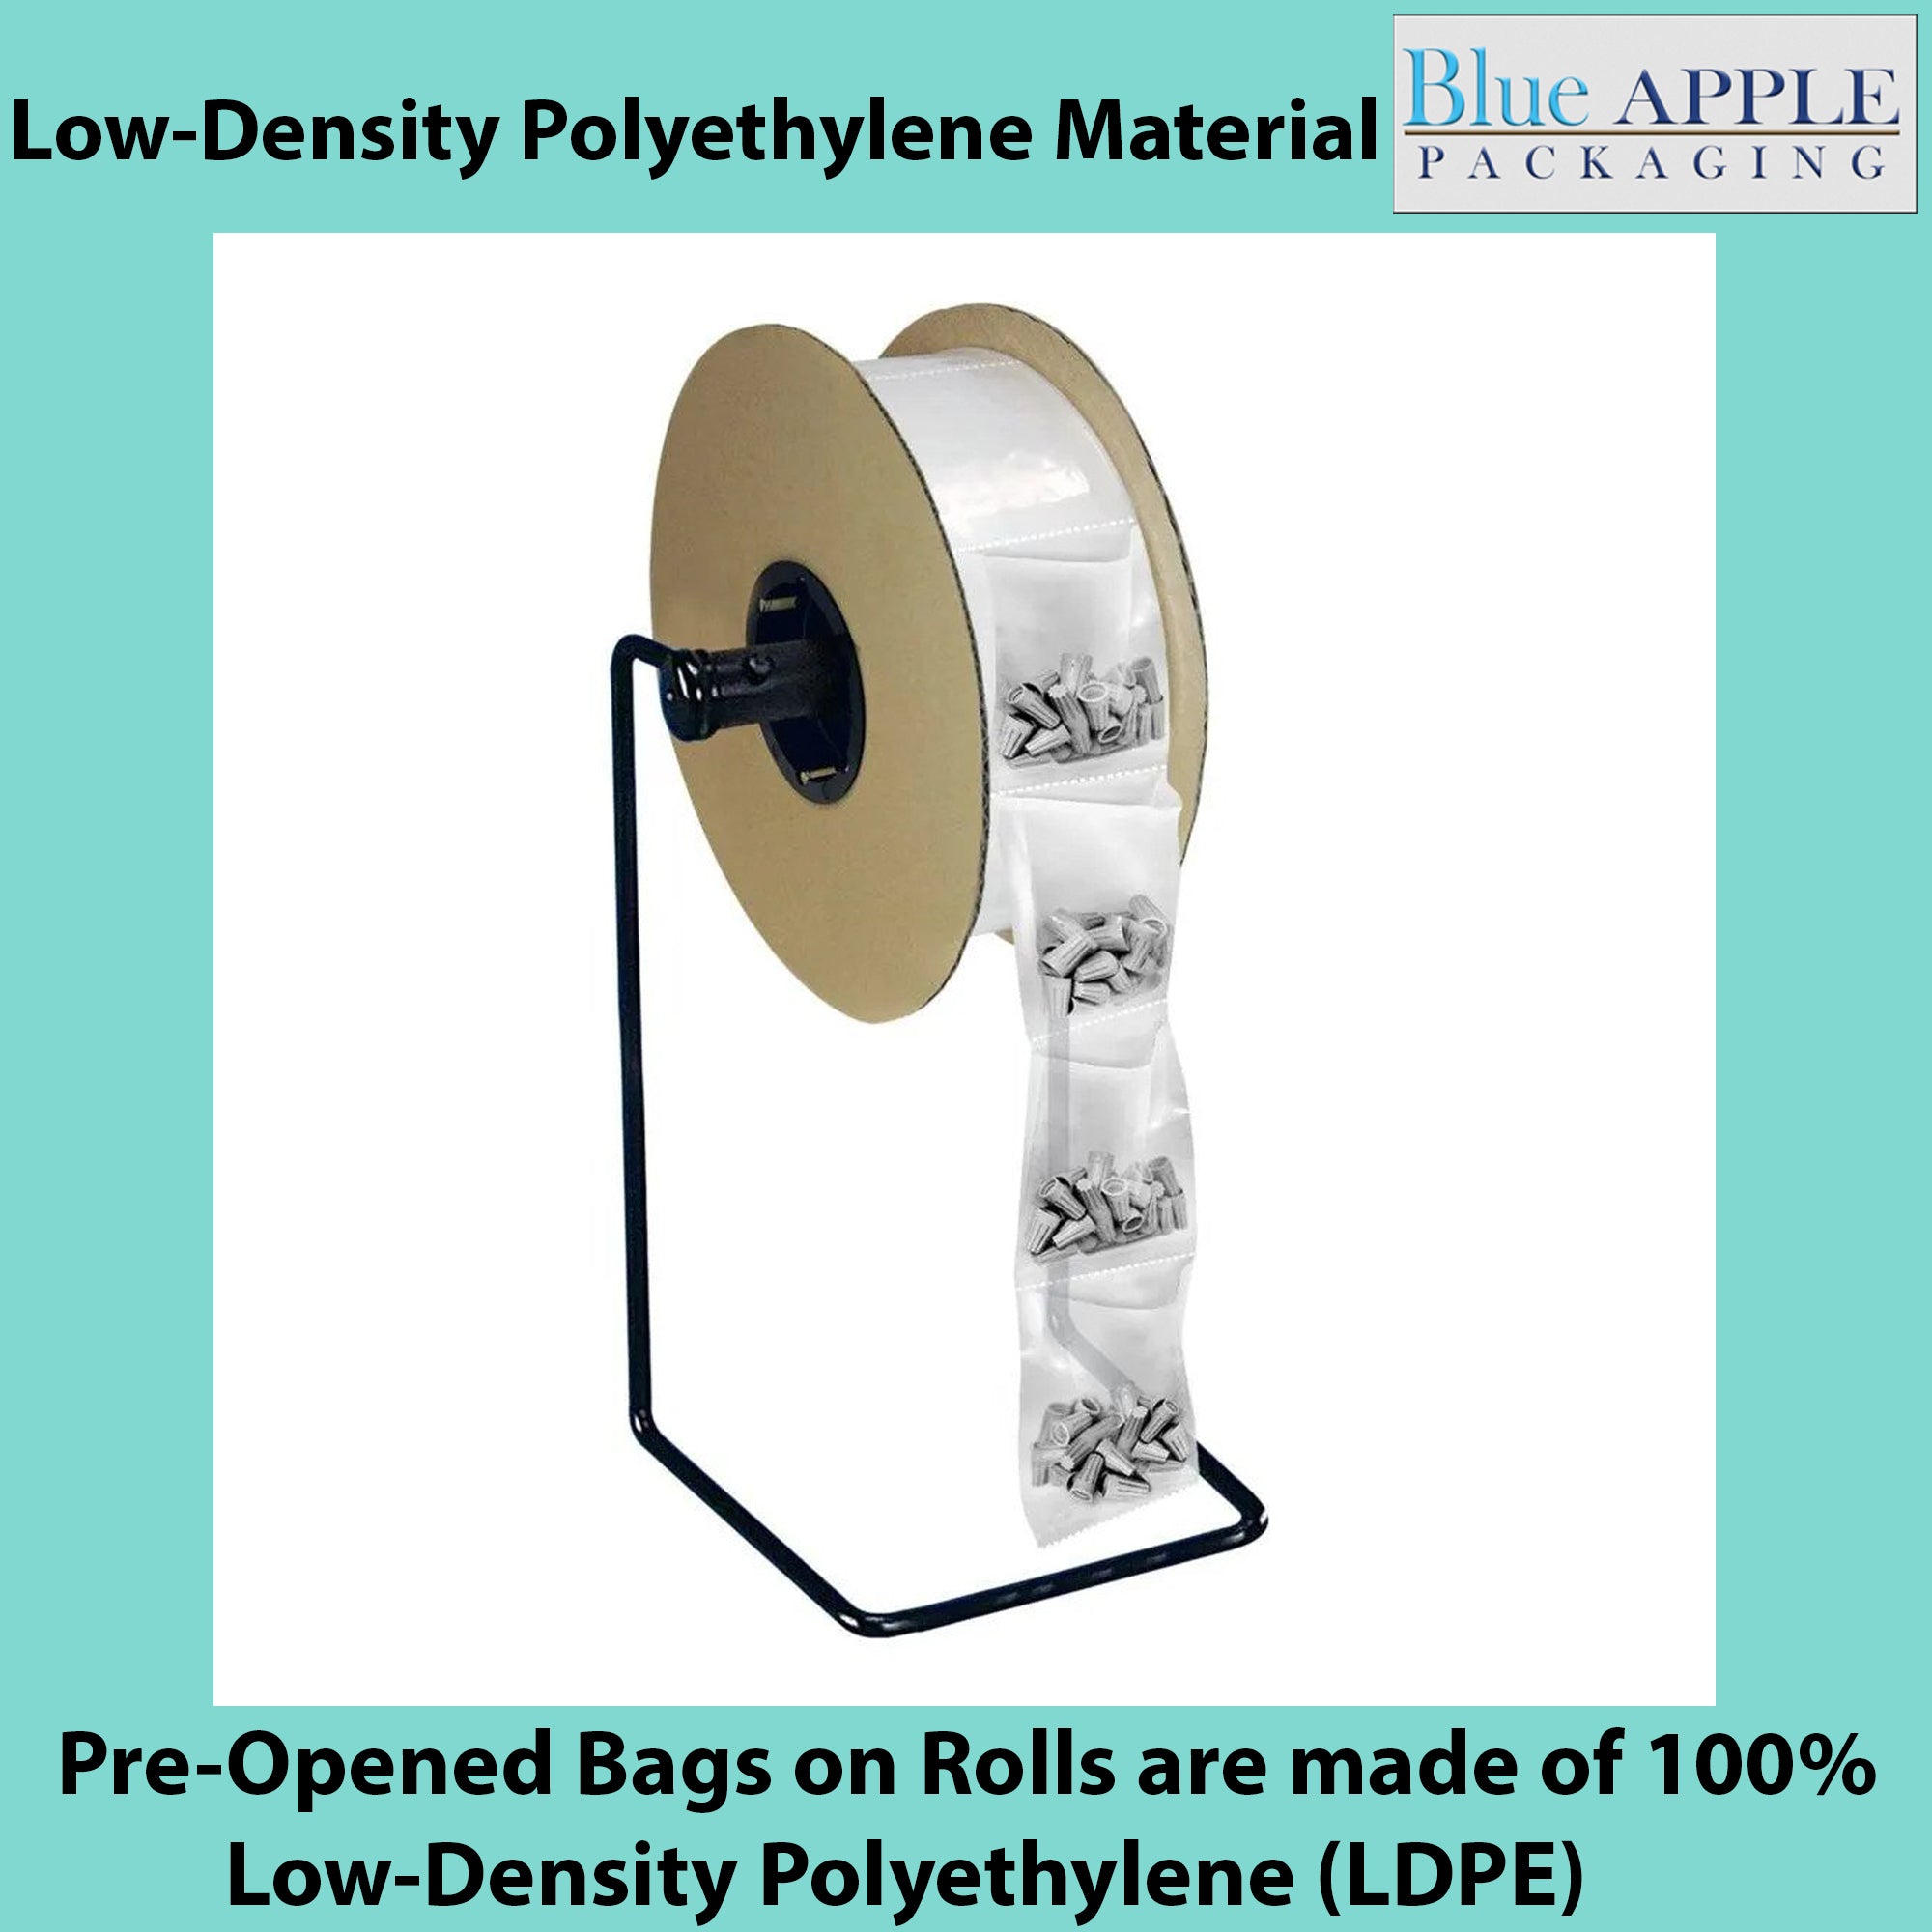 Autobag Heavy Perforated Roll Auto Fill Poly Bags- 3"x3", 2.75 Mil - 2500 Bags